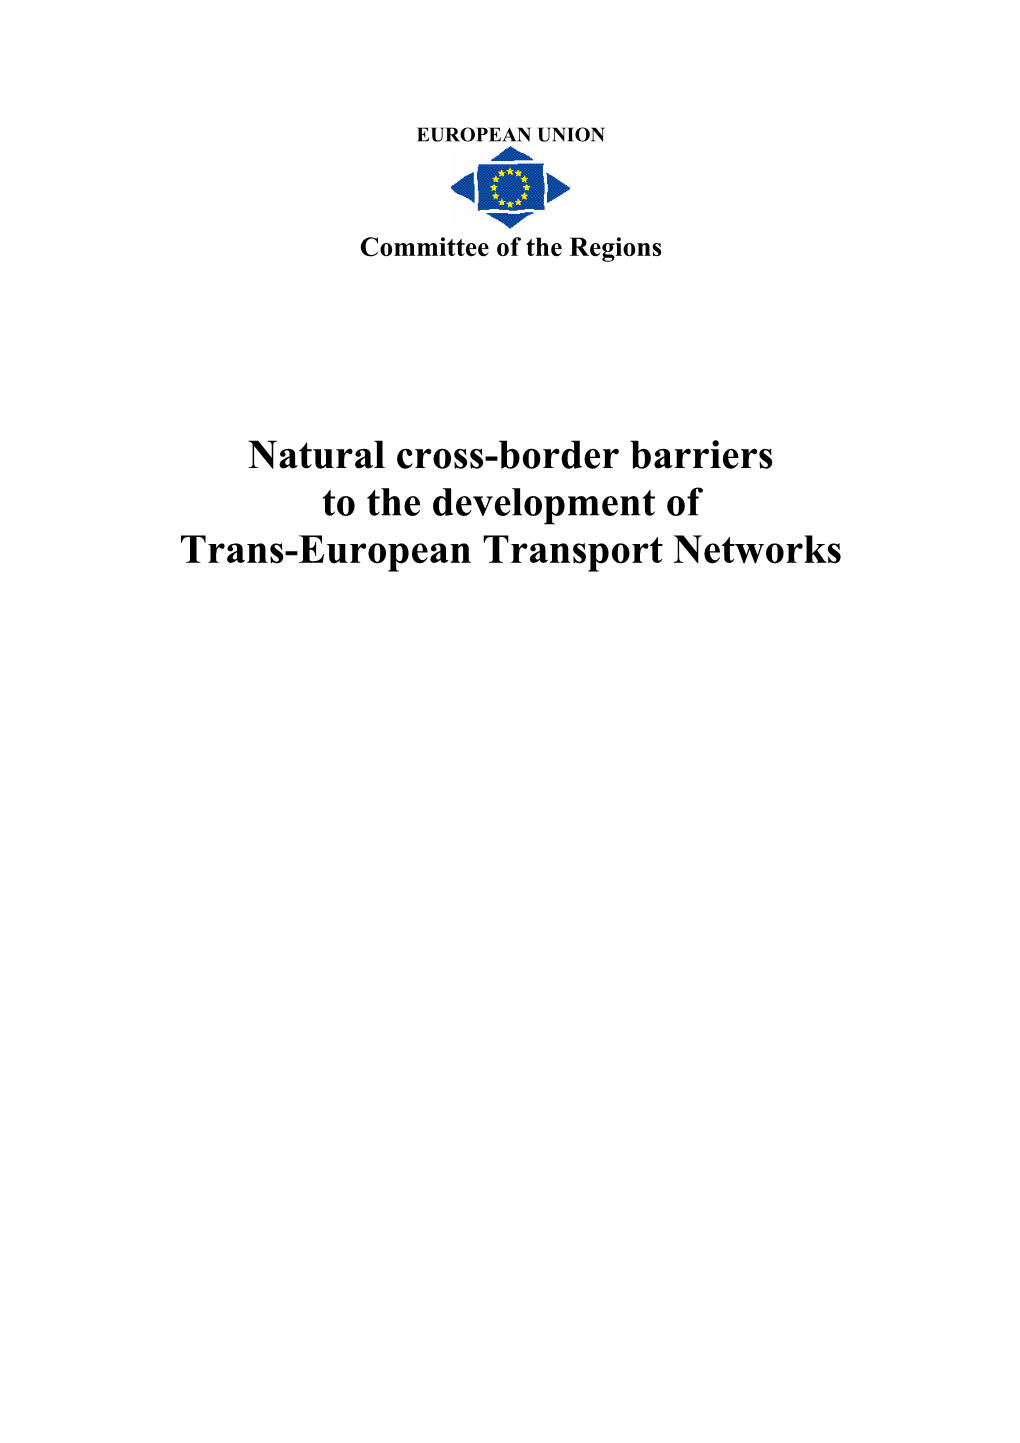 Natural Cross-Border Barriers to the Development of Trans-European Transport Networks